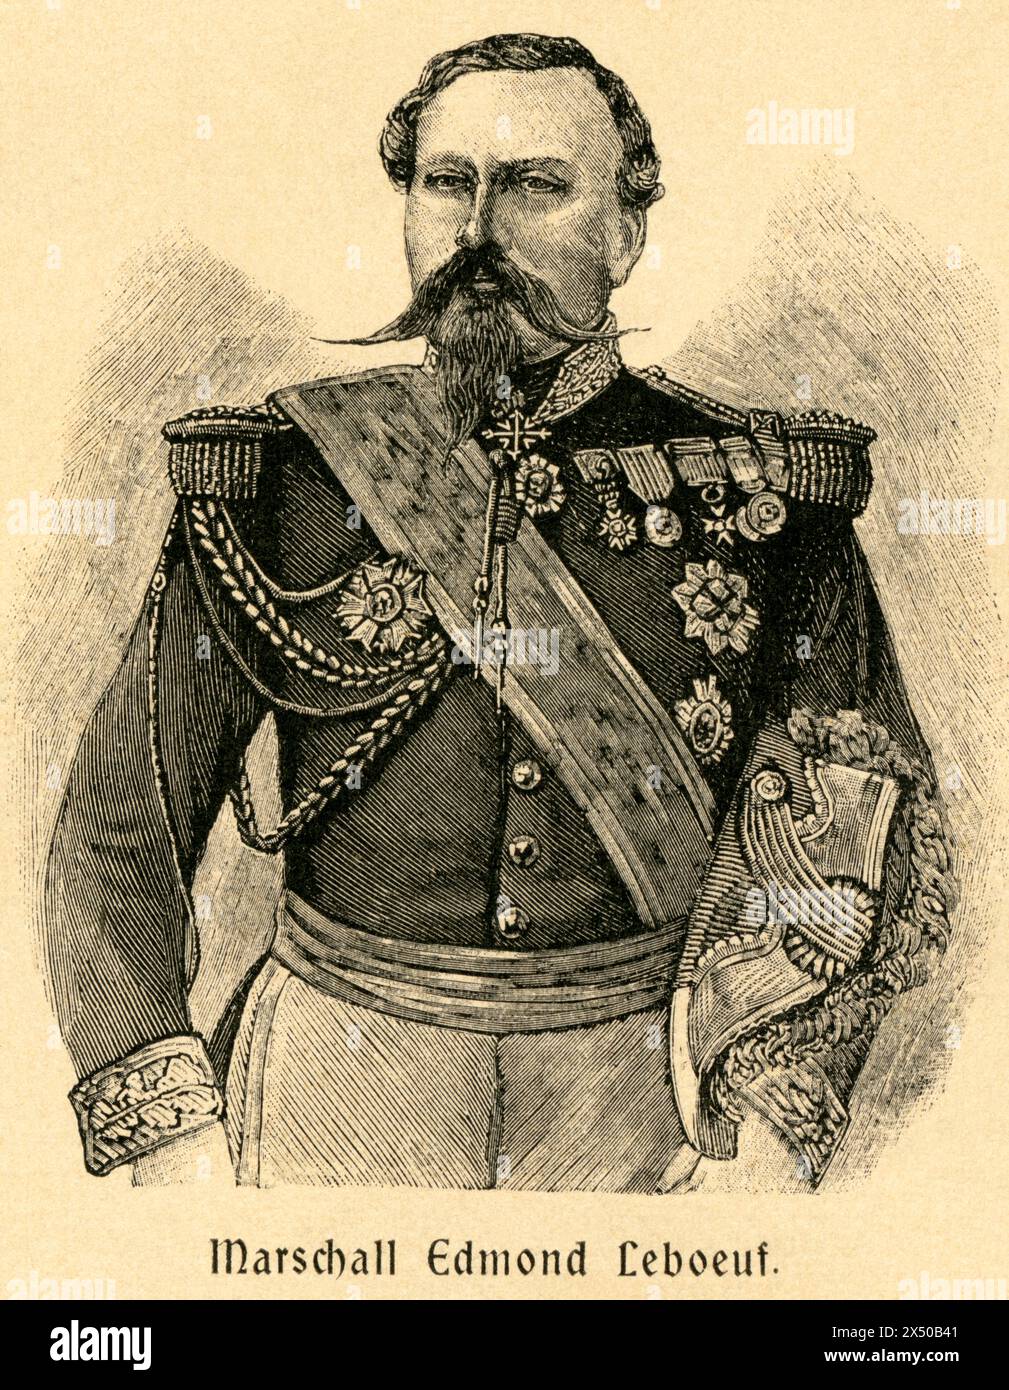 France, Paris, Marshal Edmond Leboeuf, French Minister of Defence, person of the Franco-Prussian War, ARTIST'S COPYRIGHT HAS NOT TO BE CLEARED Stock Photo